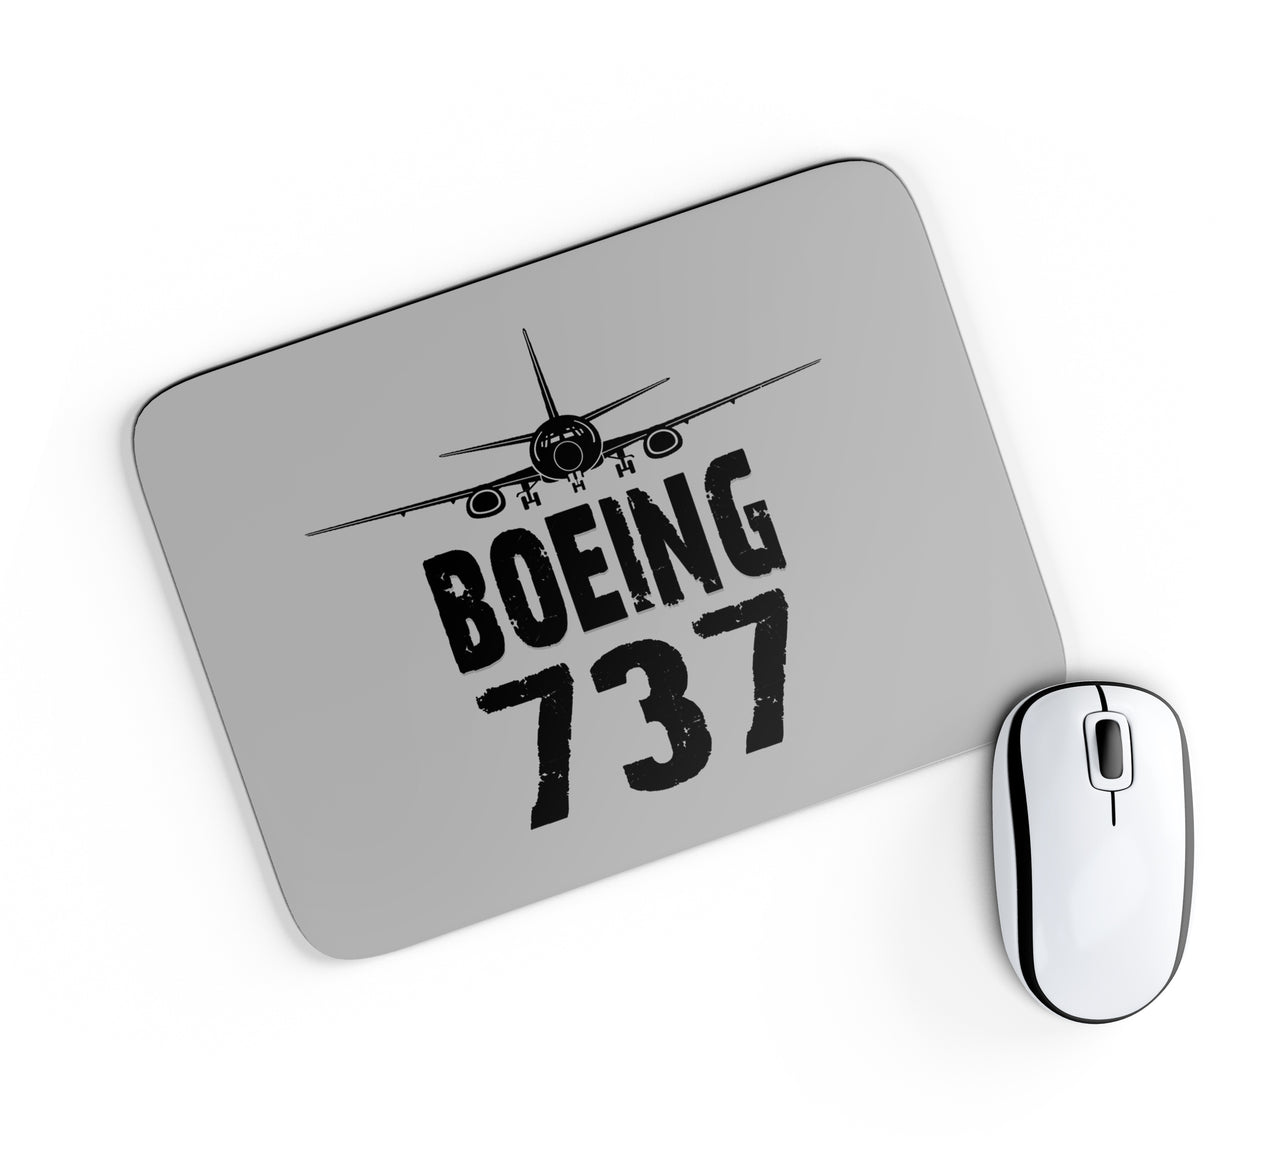 Boeing 737 & Plane Designed Mouse Pads